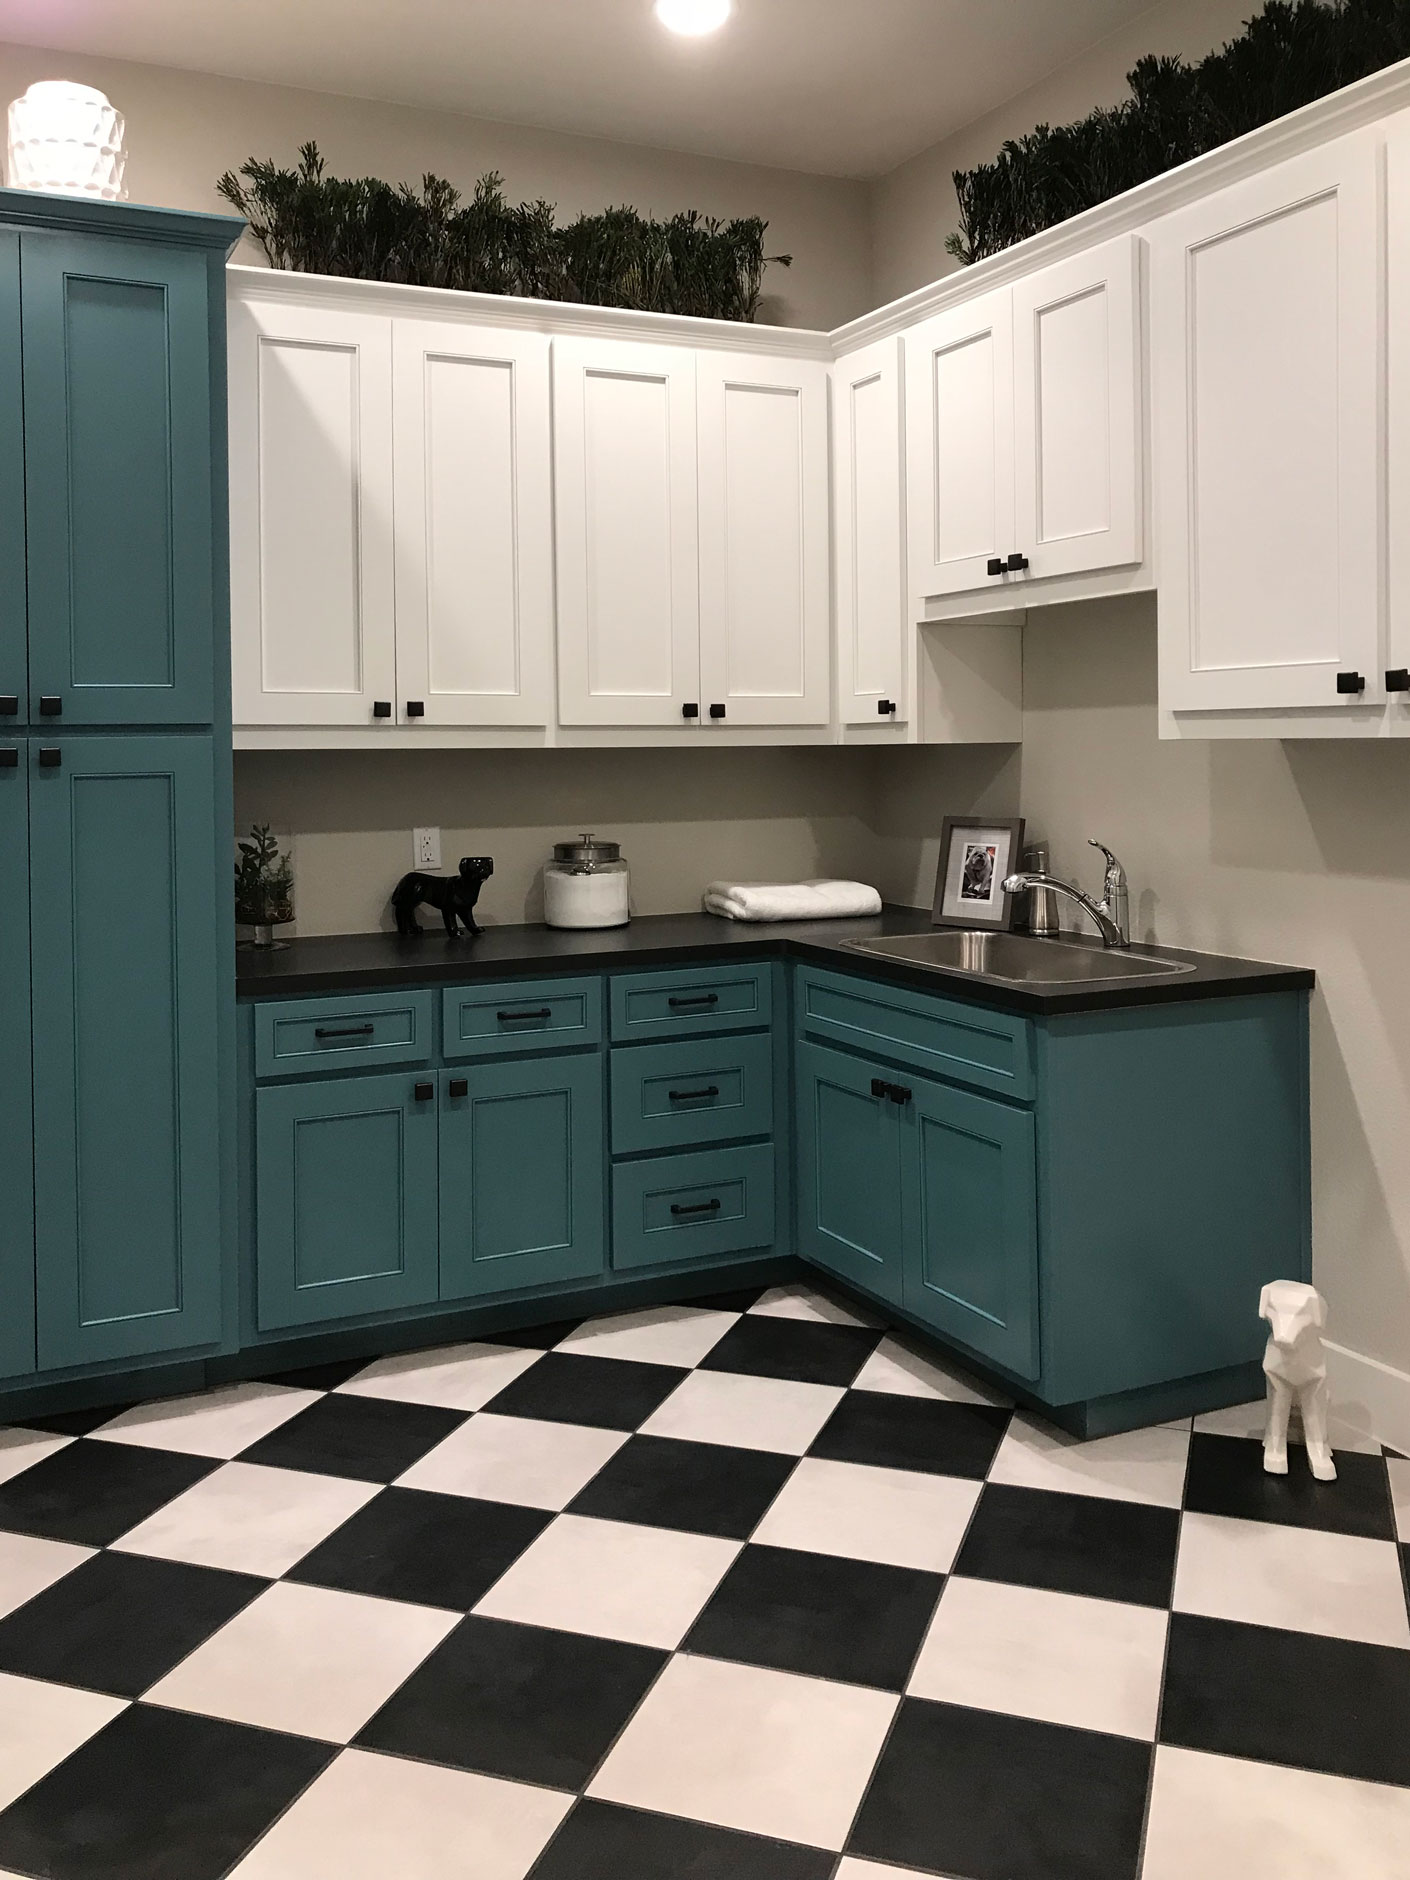 Laundry room with turquoise blue and white cabinets - MW15